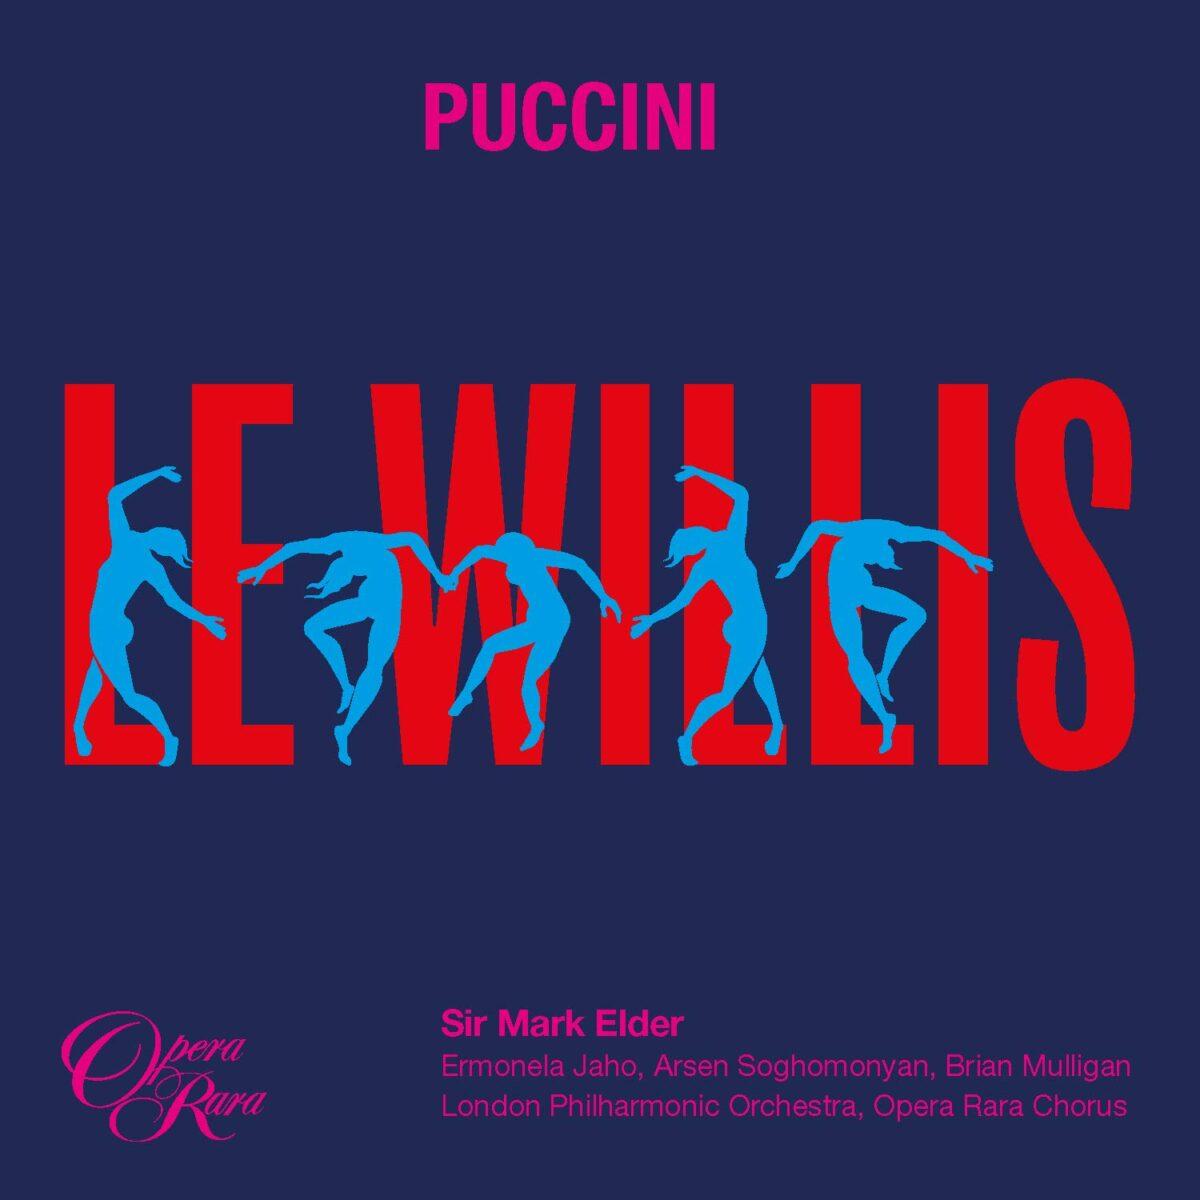 The album cover for Puccini's first opera.